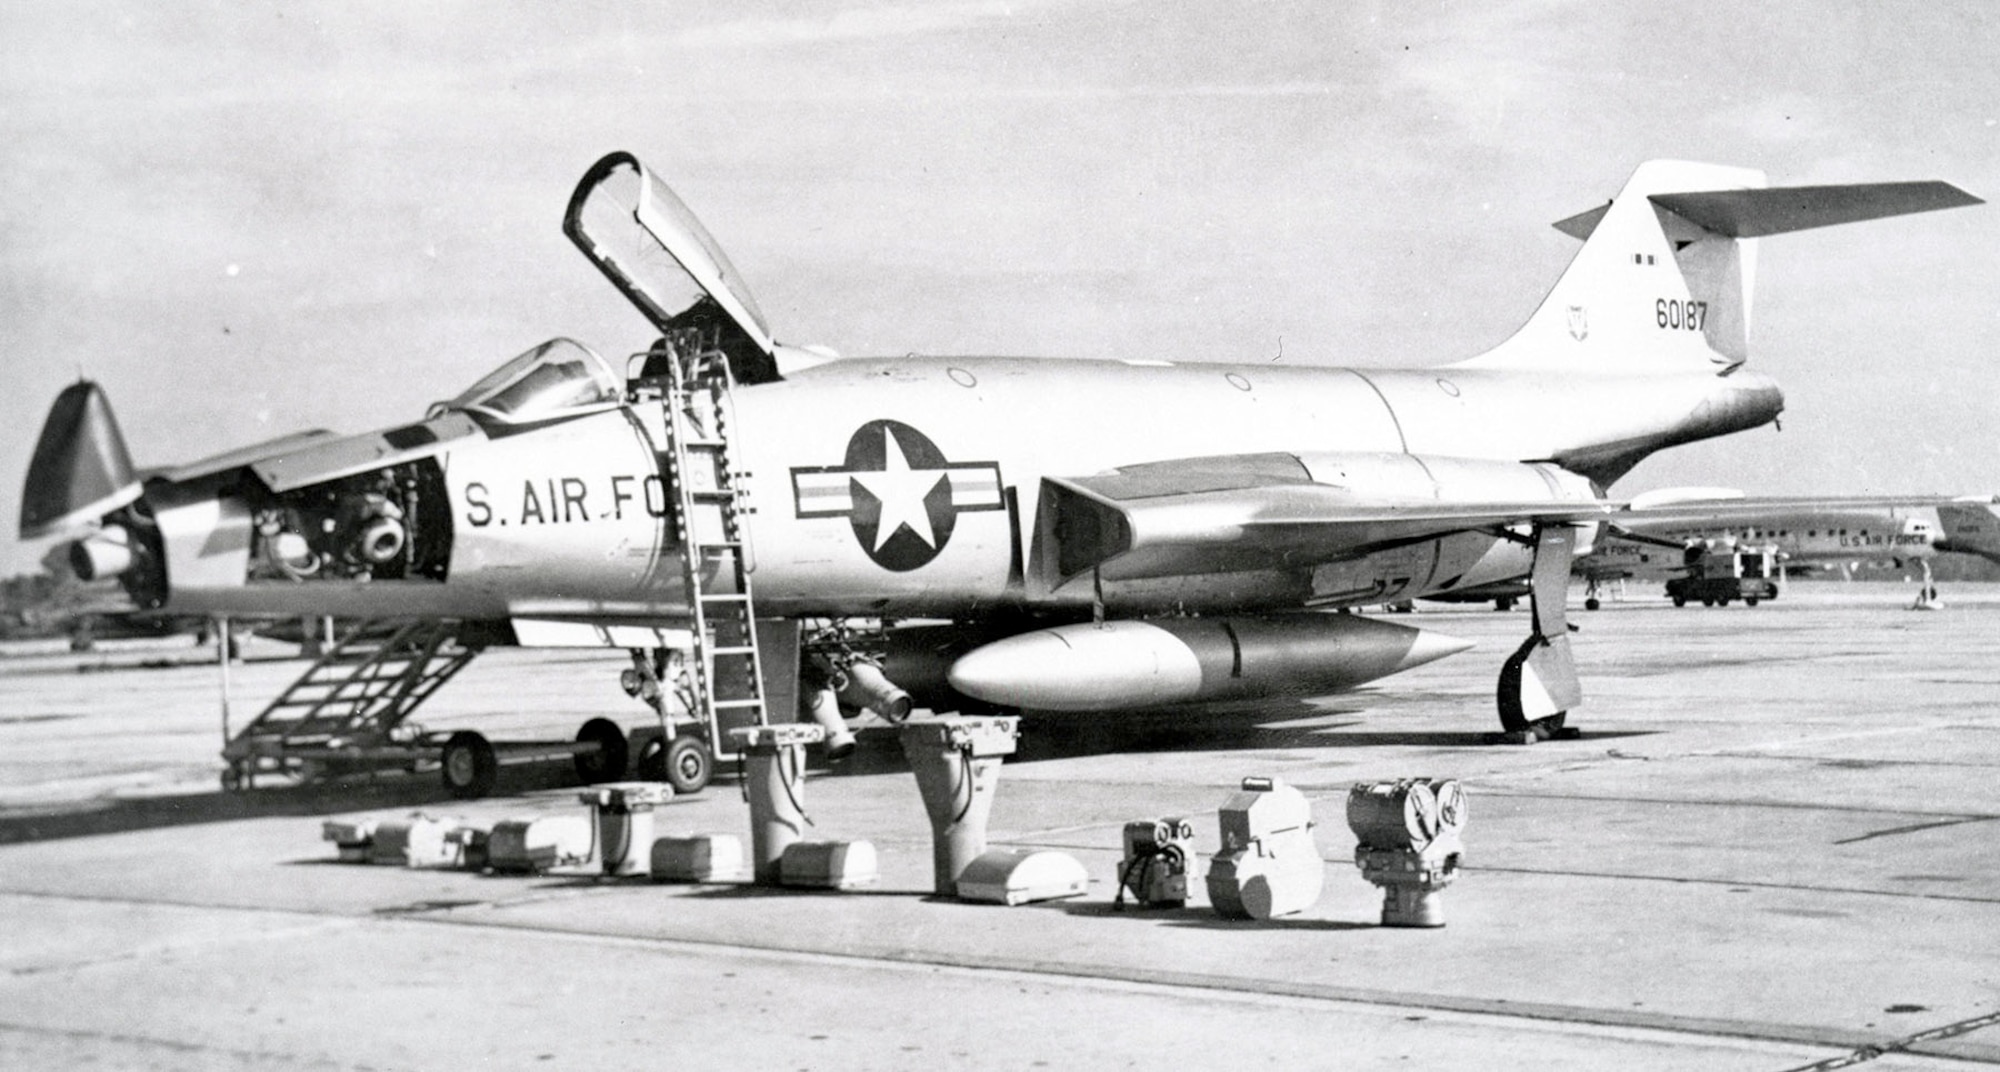 The RF-101C could carry many different types of optical cameras, as displayed here. The aircraft’s three camera bays are open (nose tip, nose and under the national insignia). (U.S. Air Force photo)